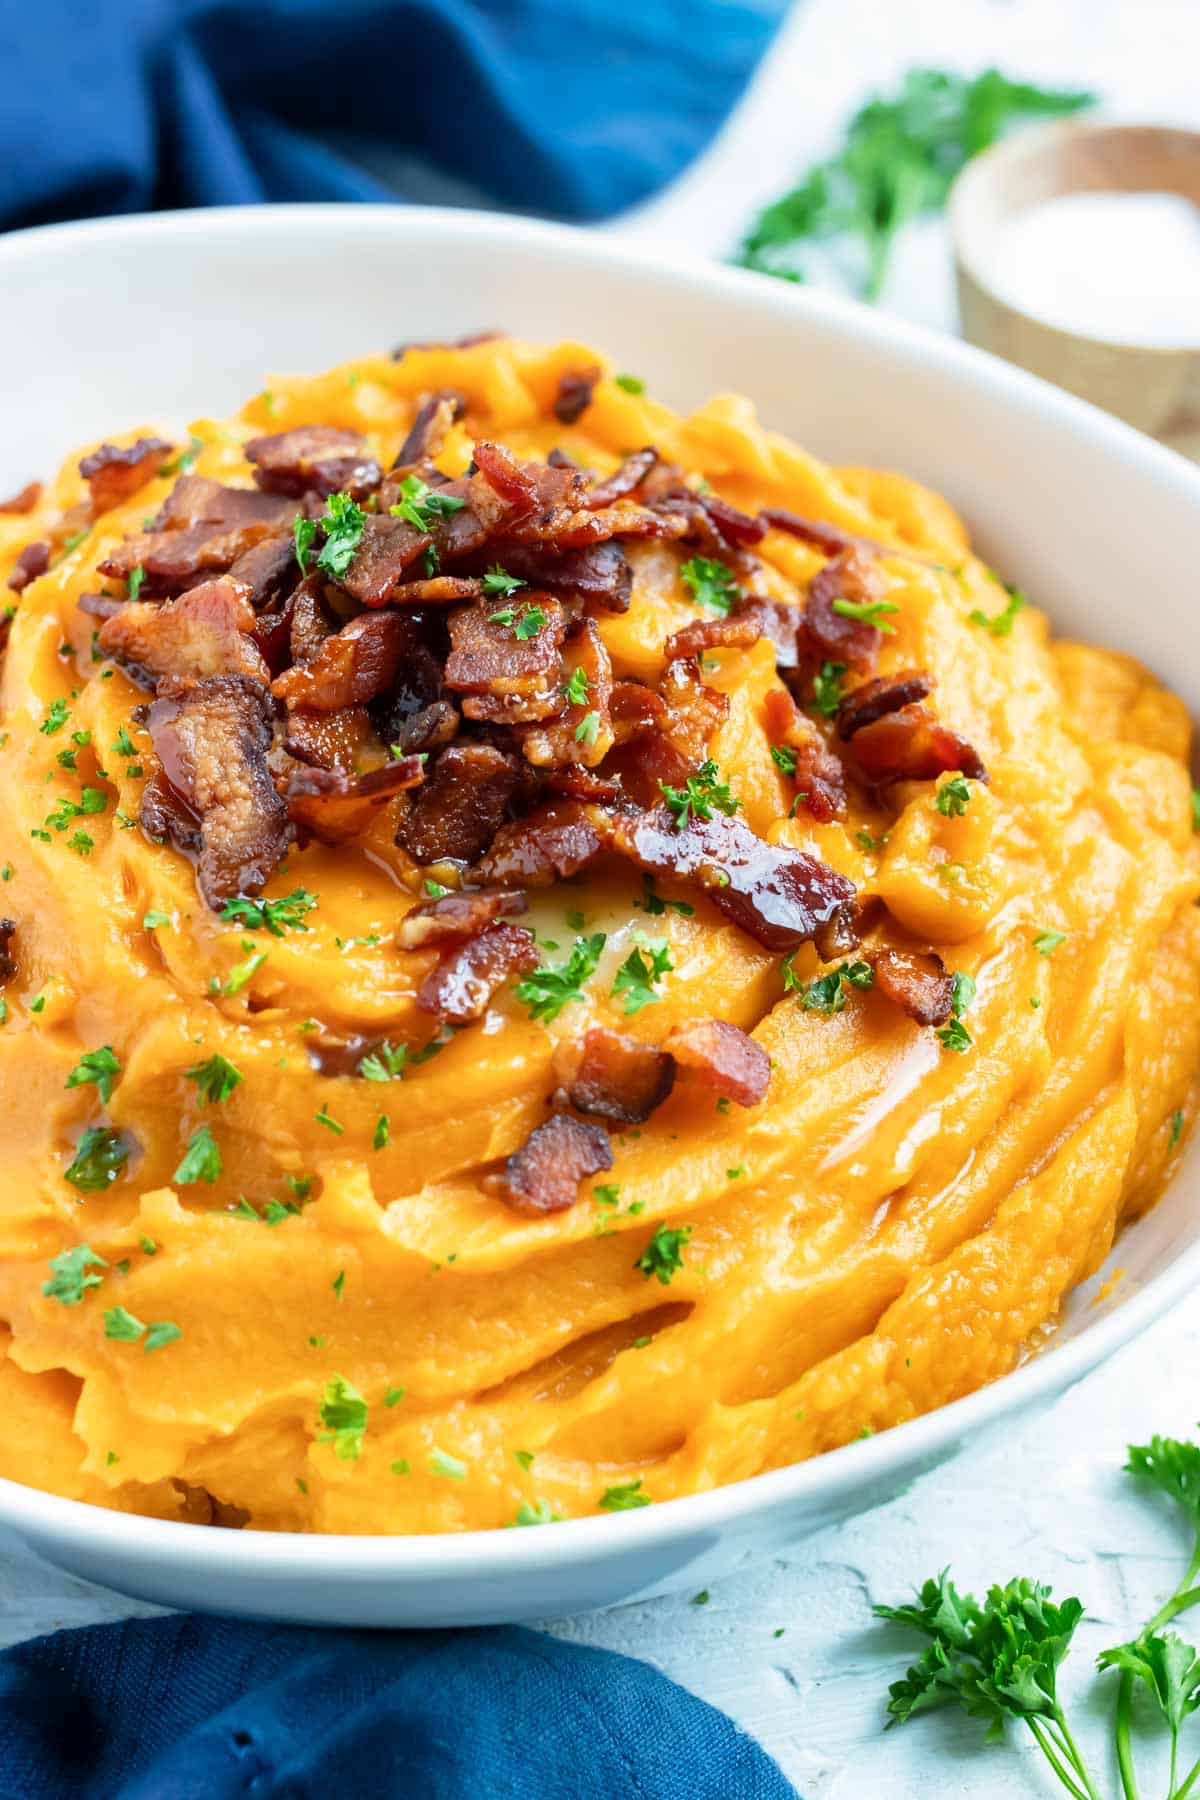 Bacon crumbled on top of a quick, easy, healthy side dish recipe for sweet potato mash.